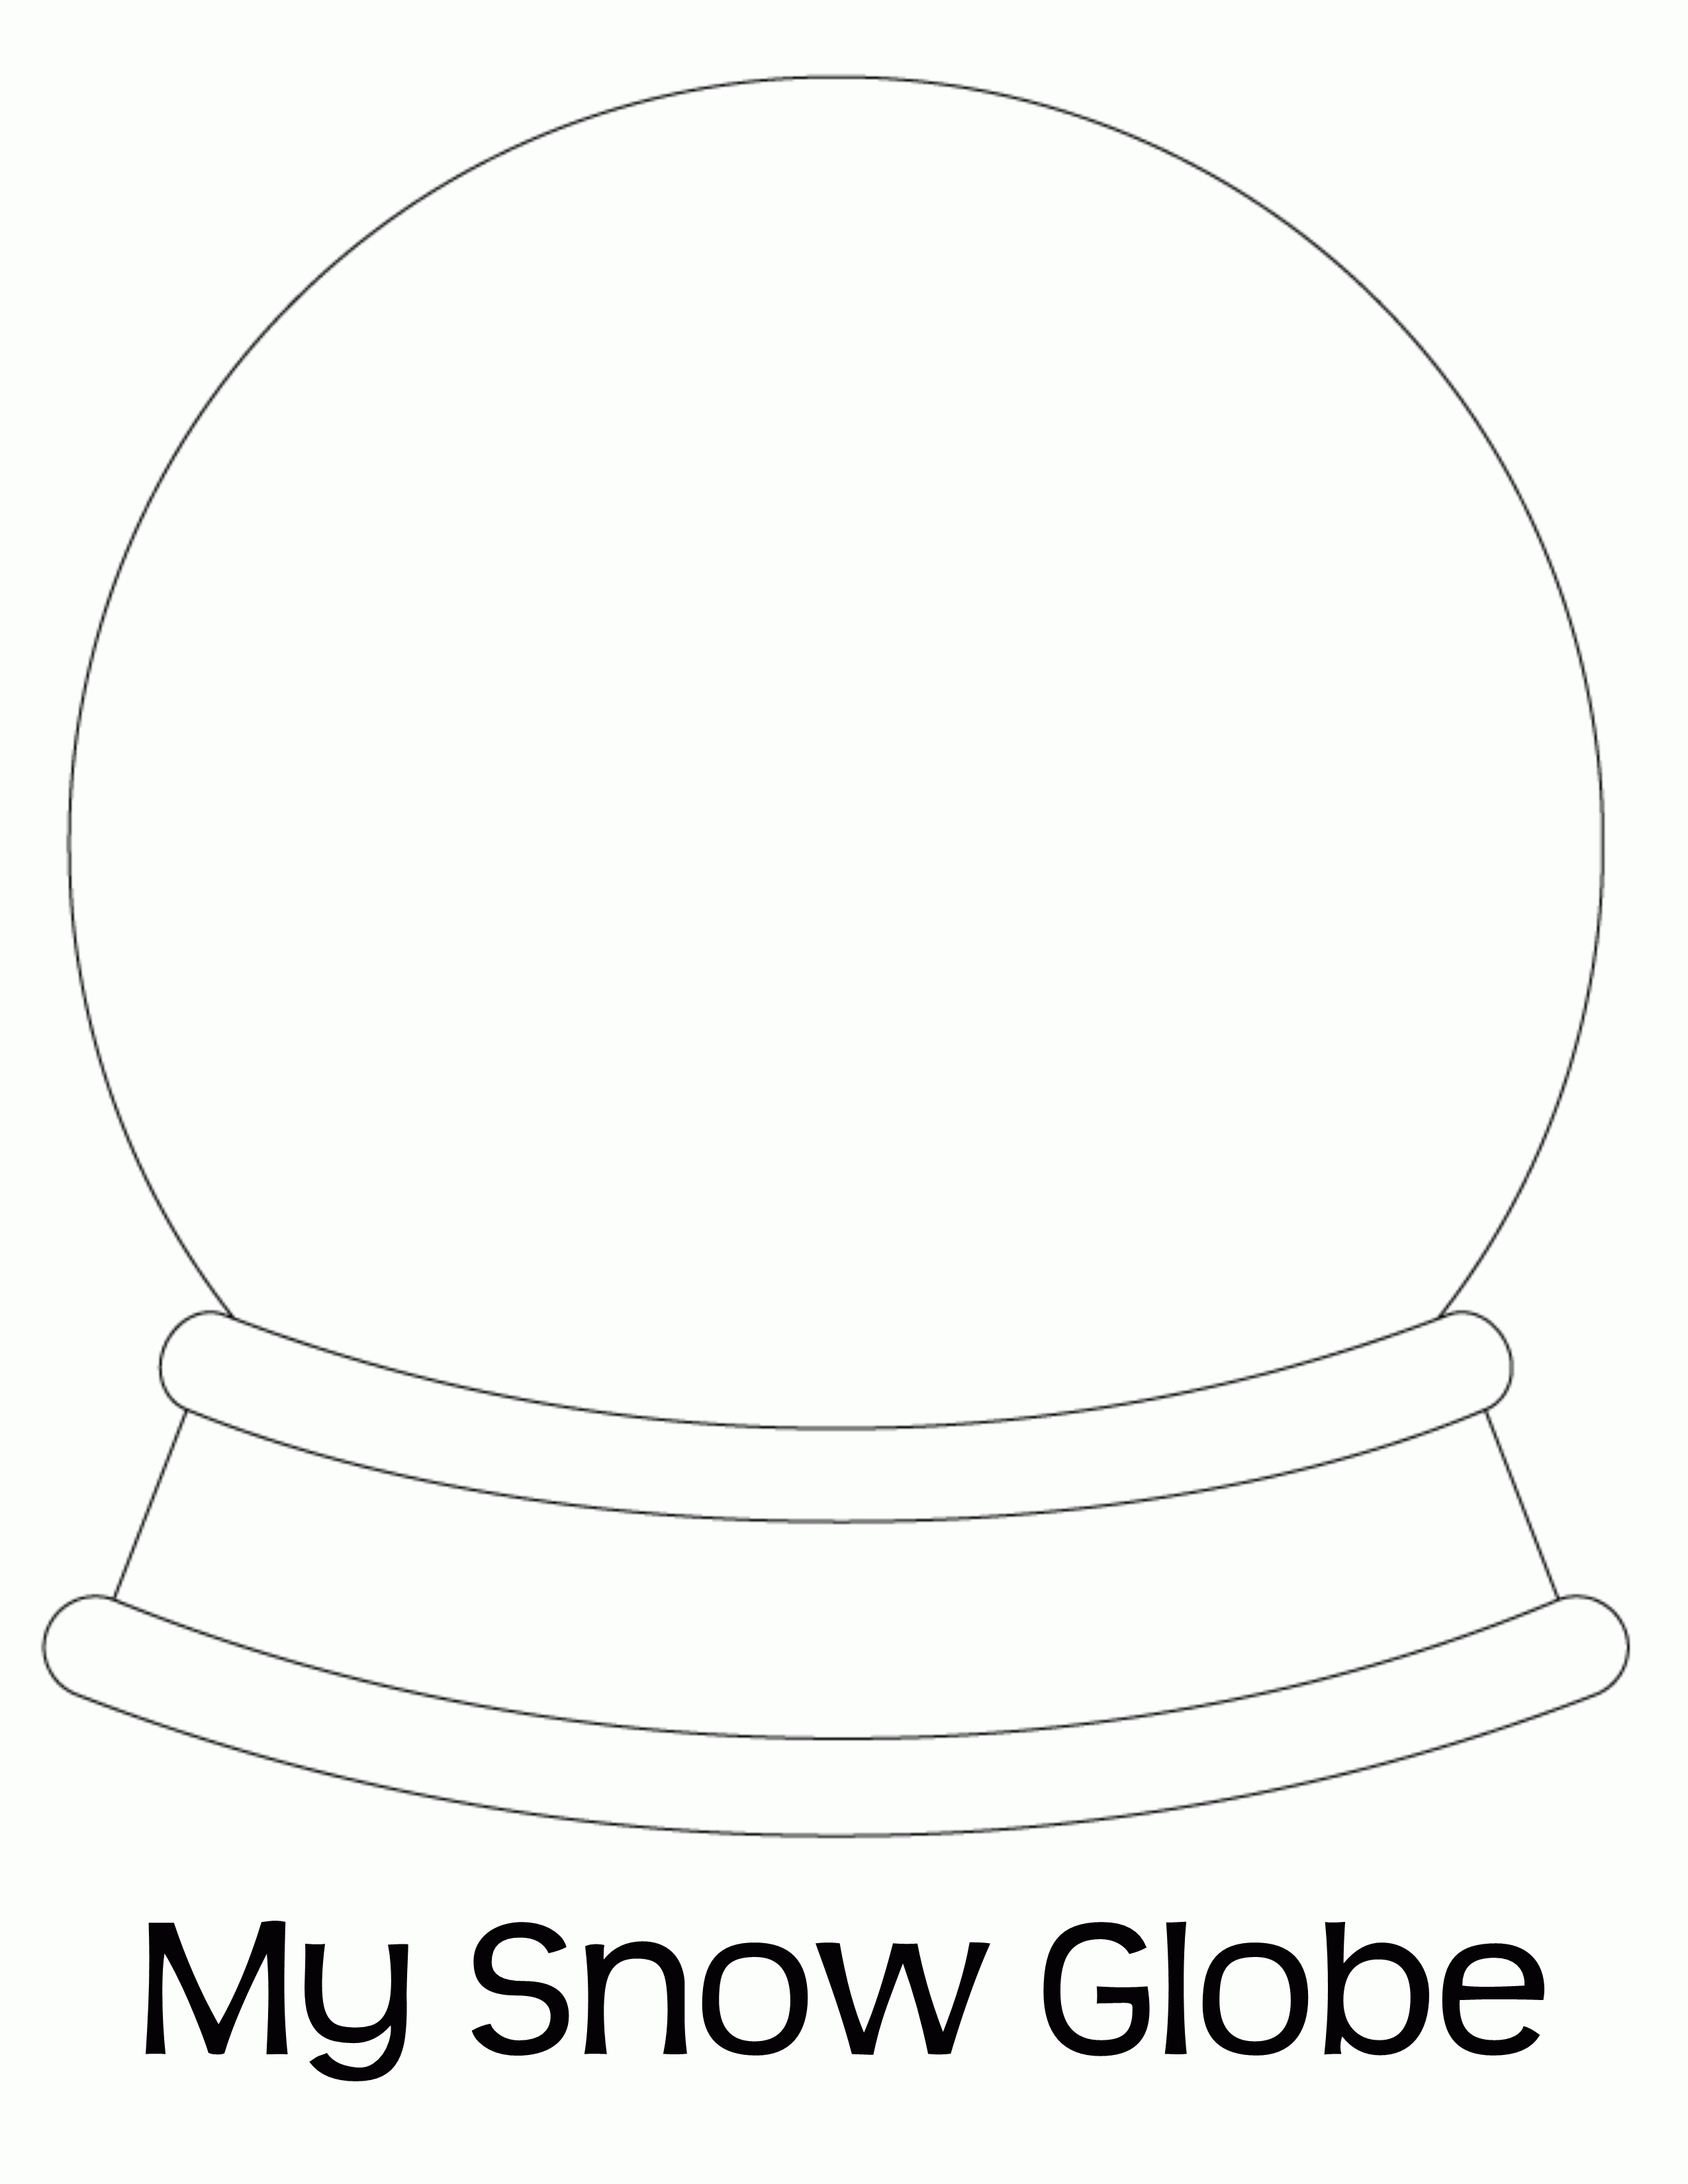 Snow Globe Coloring Page - Coloring Home